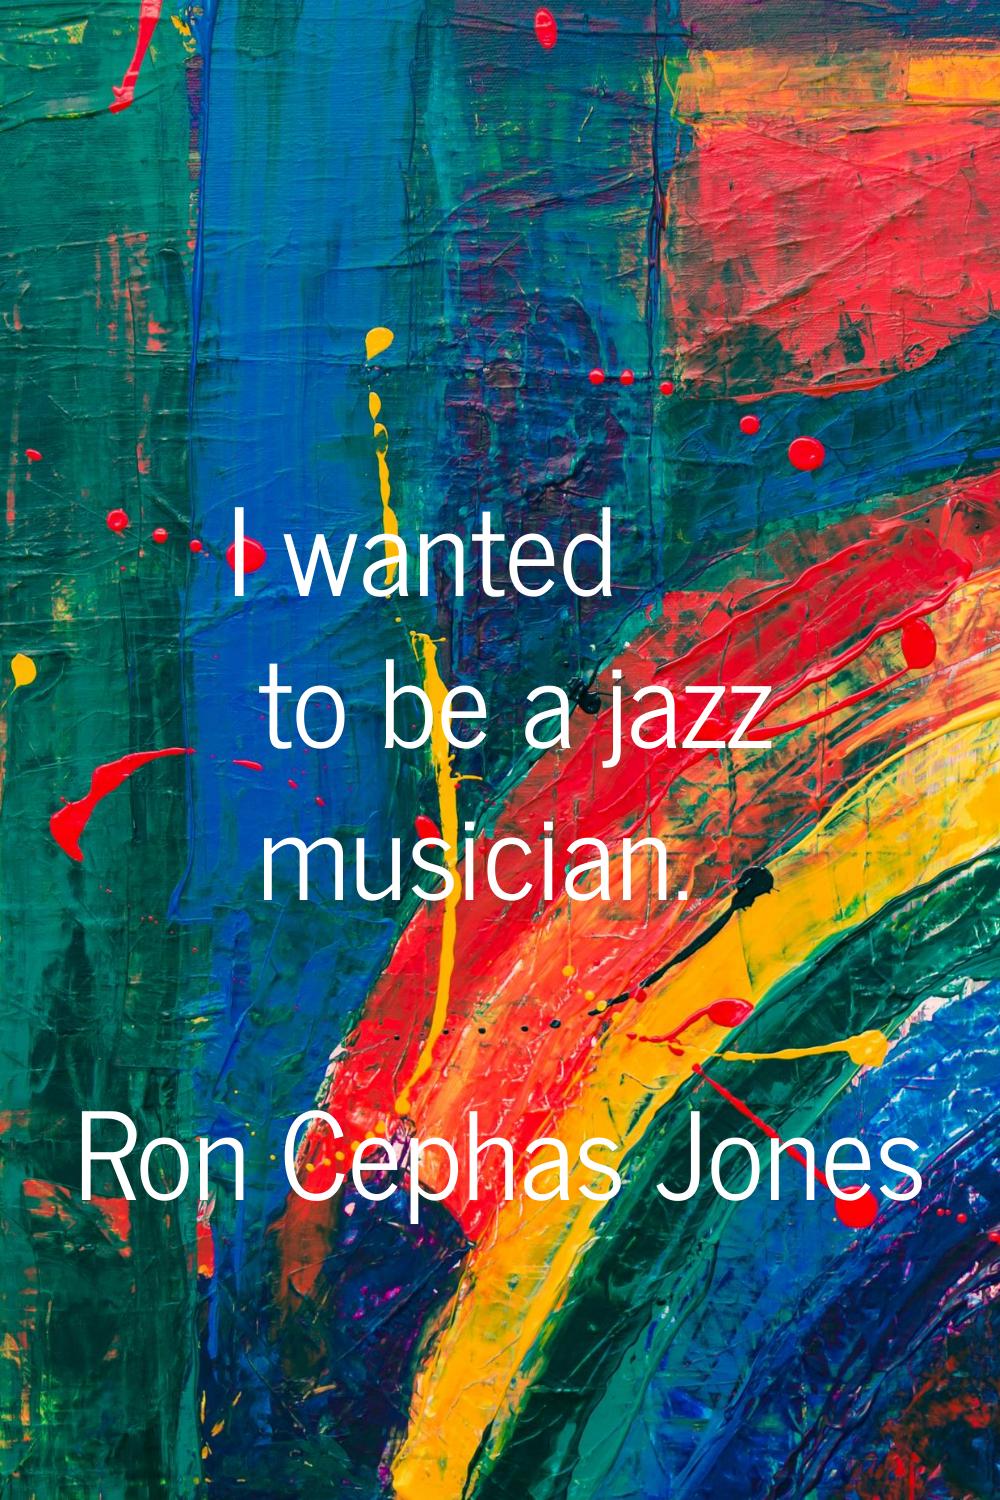 I wanted to be a jazz musician.